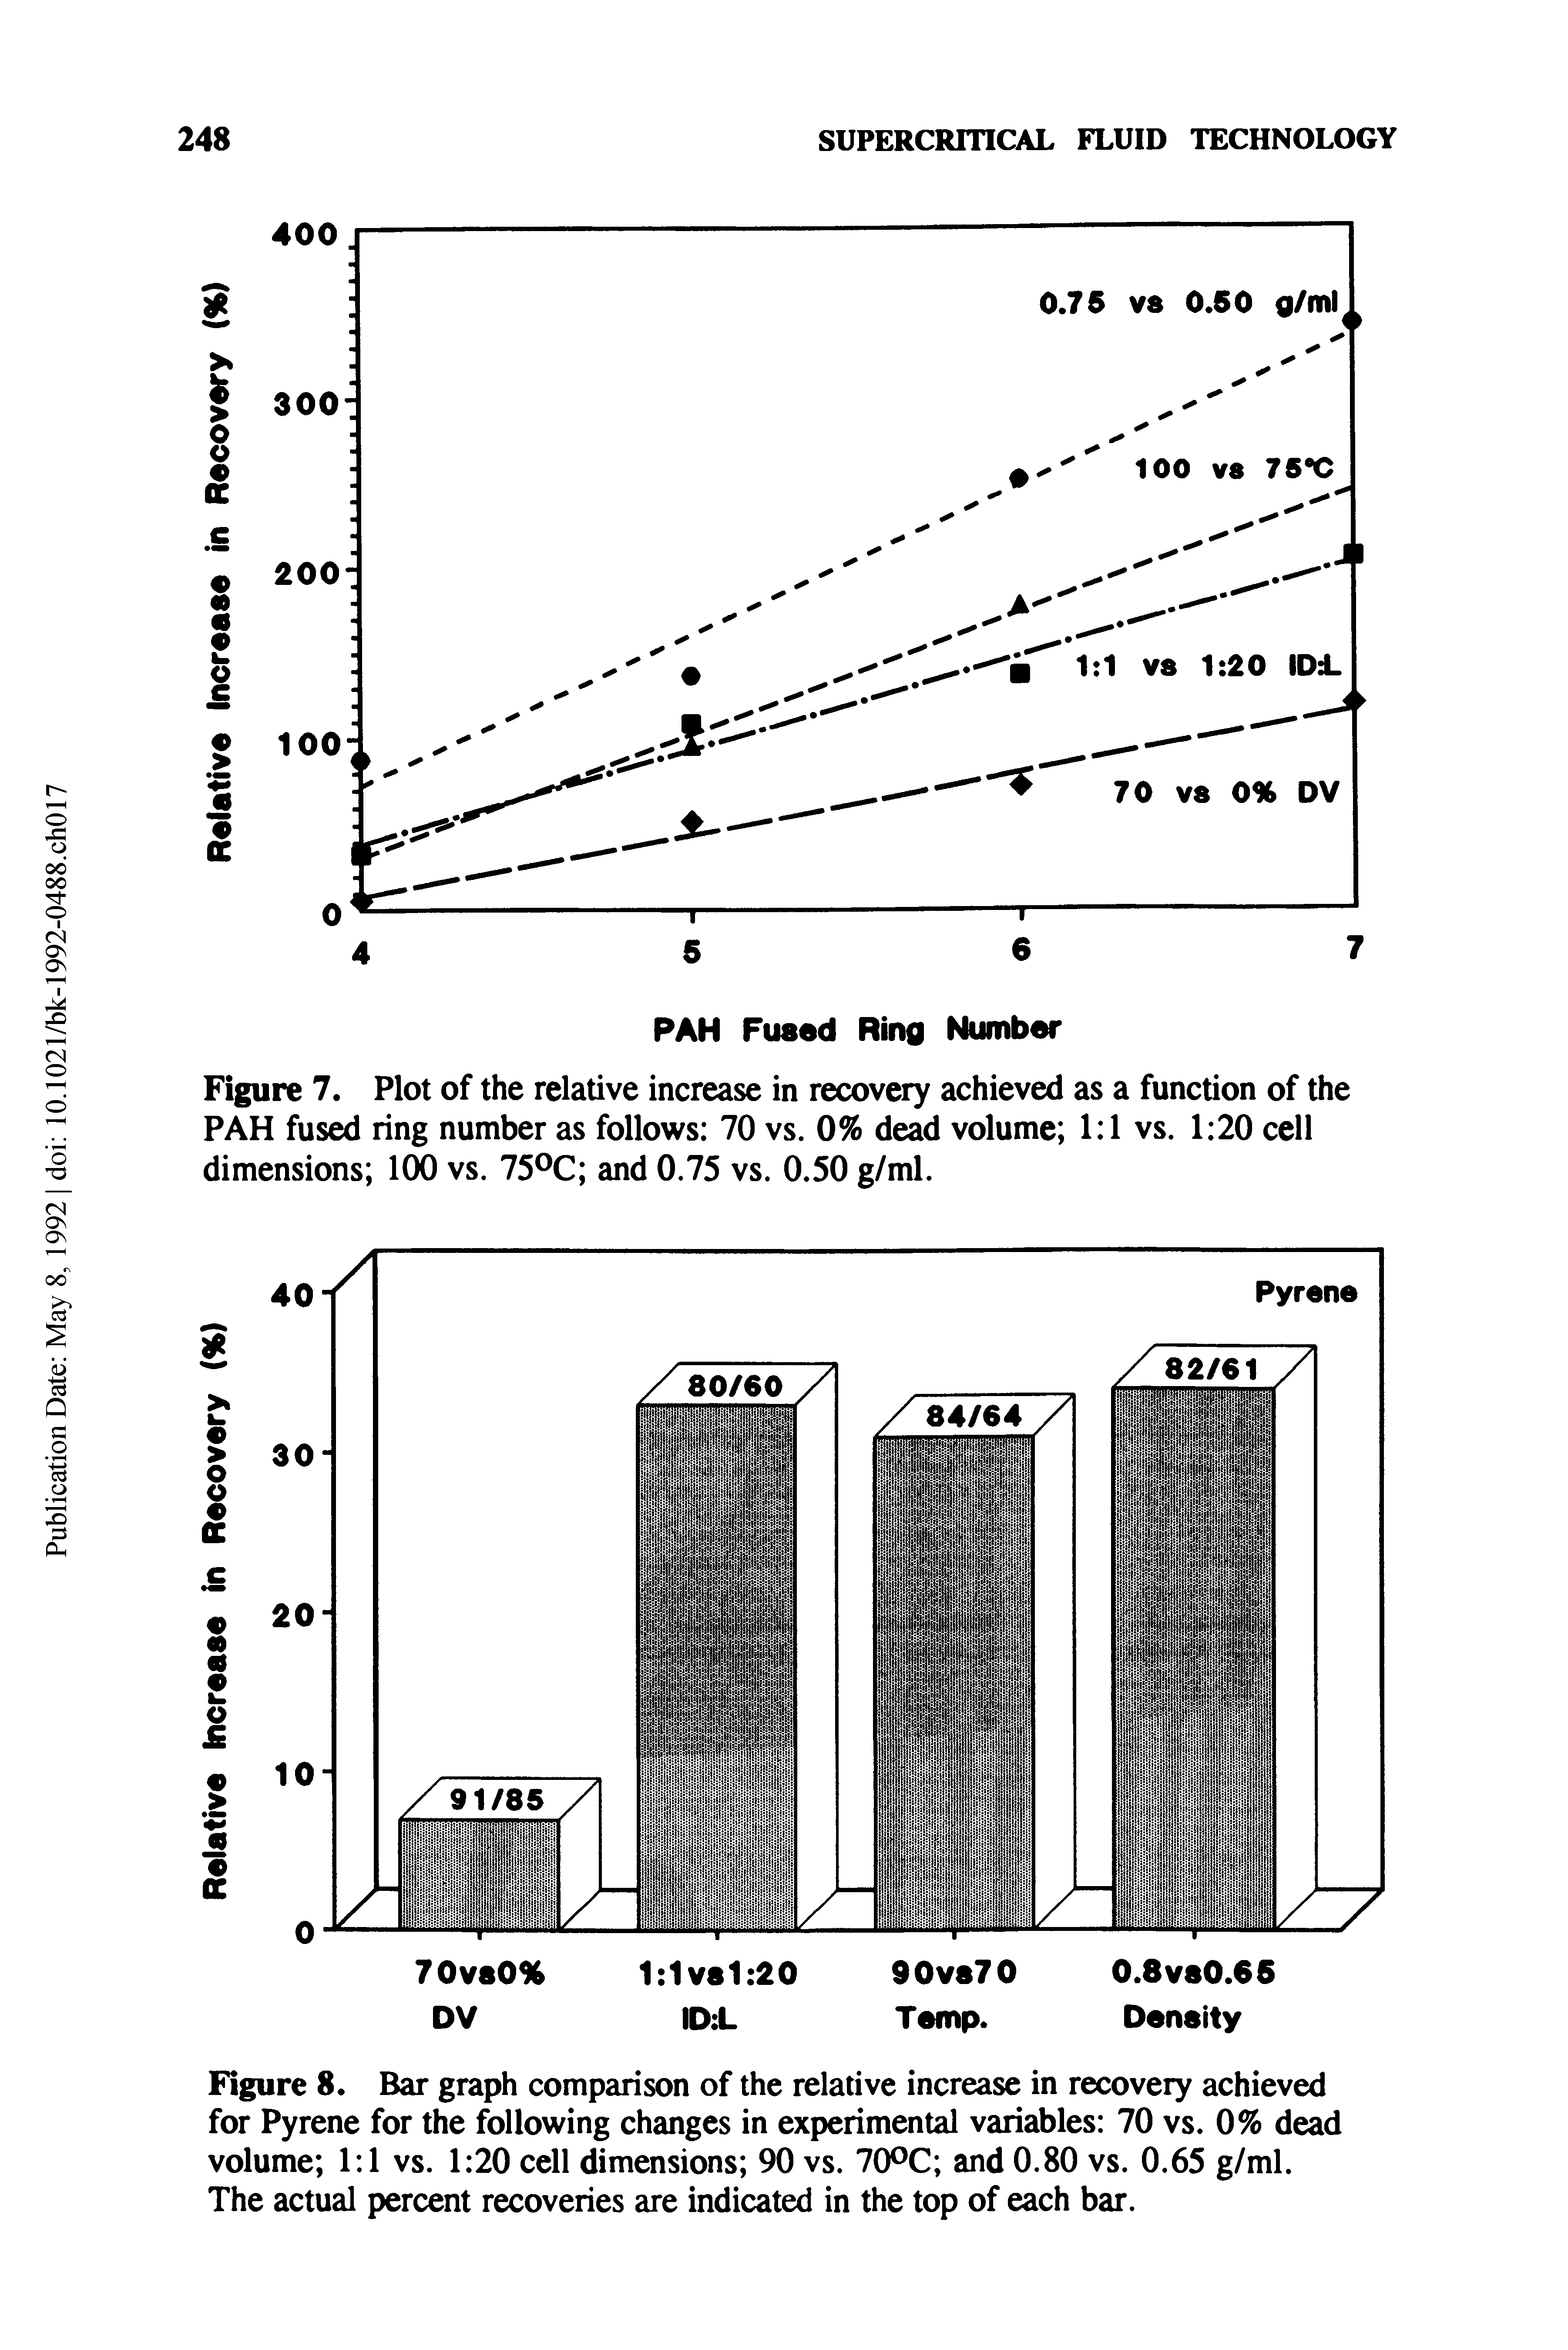 Figure 8. Bar graph comparison of the relative increase in recovery achieved for Pyrene for the following changes in experimental variables 70 vs. 0% dead volume 1 1 vs. 1 20 cell dimensions 90 vs. 70°C and 0.80 vs. 0.65 g/ml. The actual percent recoveries are indicated in the top of each bar.